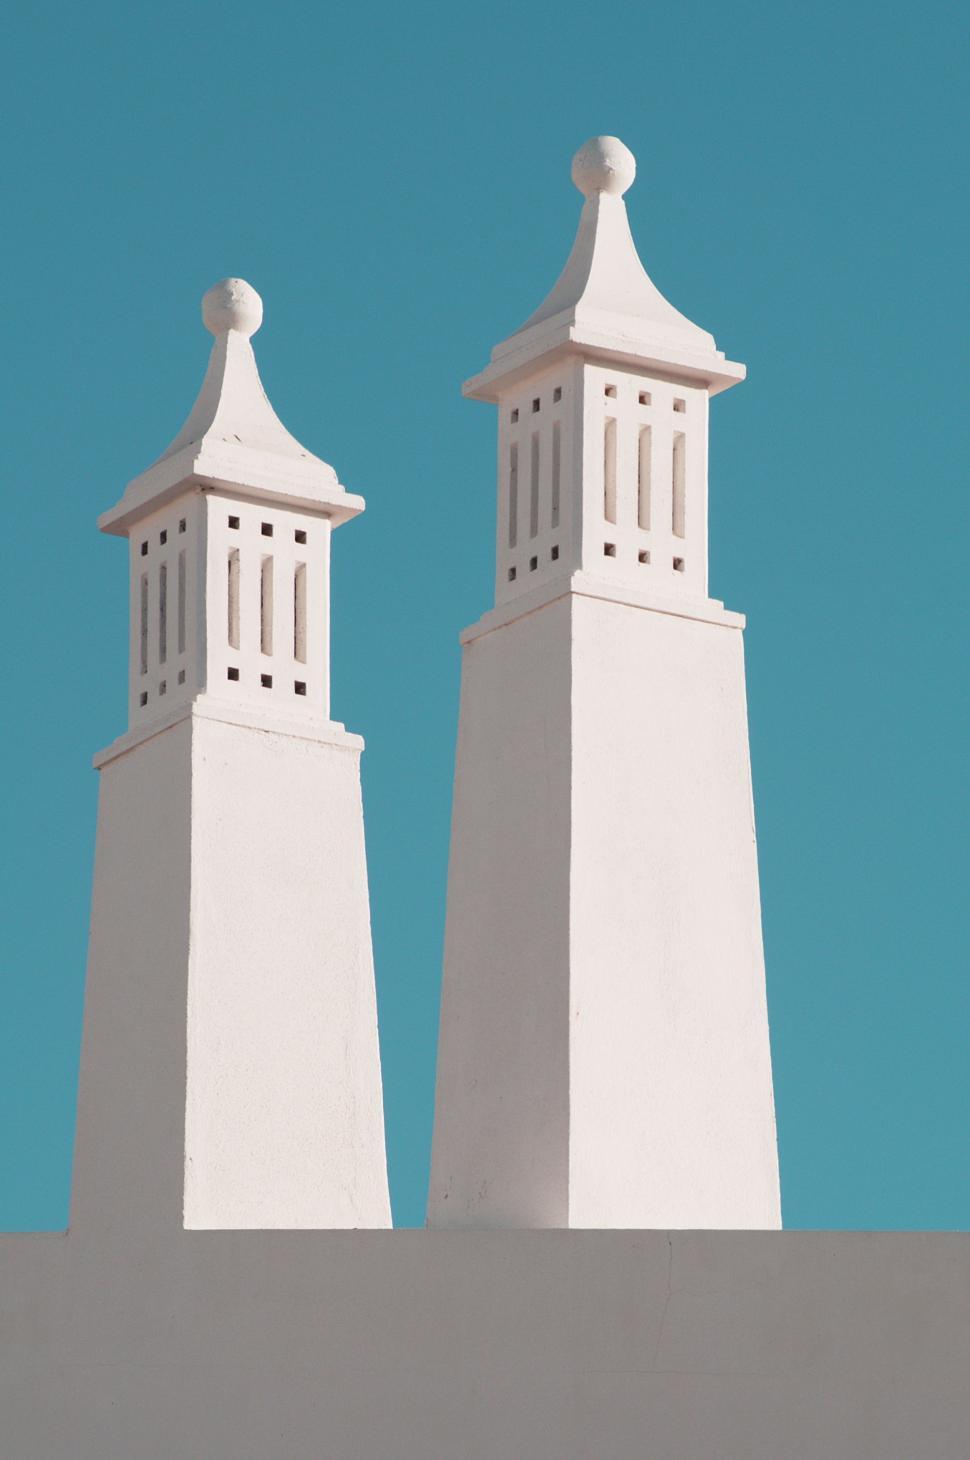 Free Image of Twin White Towers Atop Building 